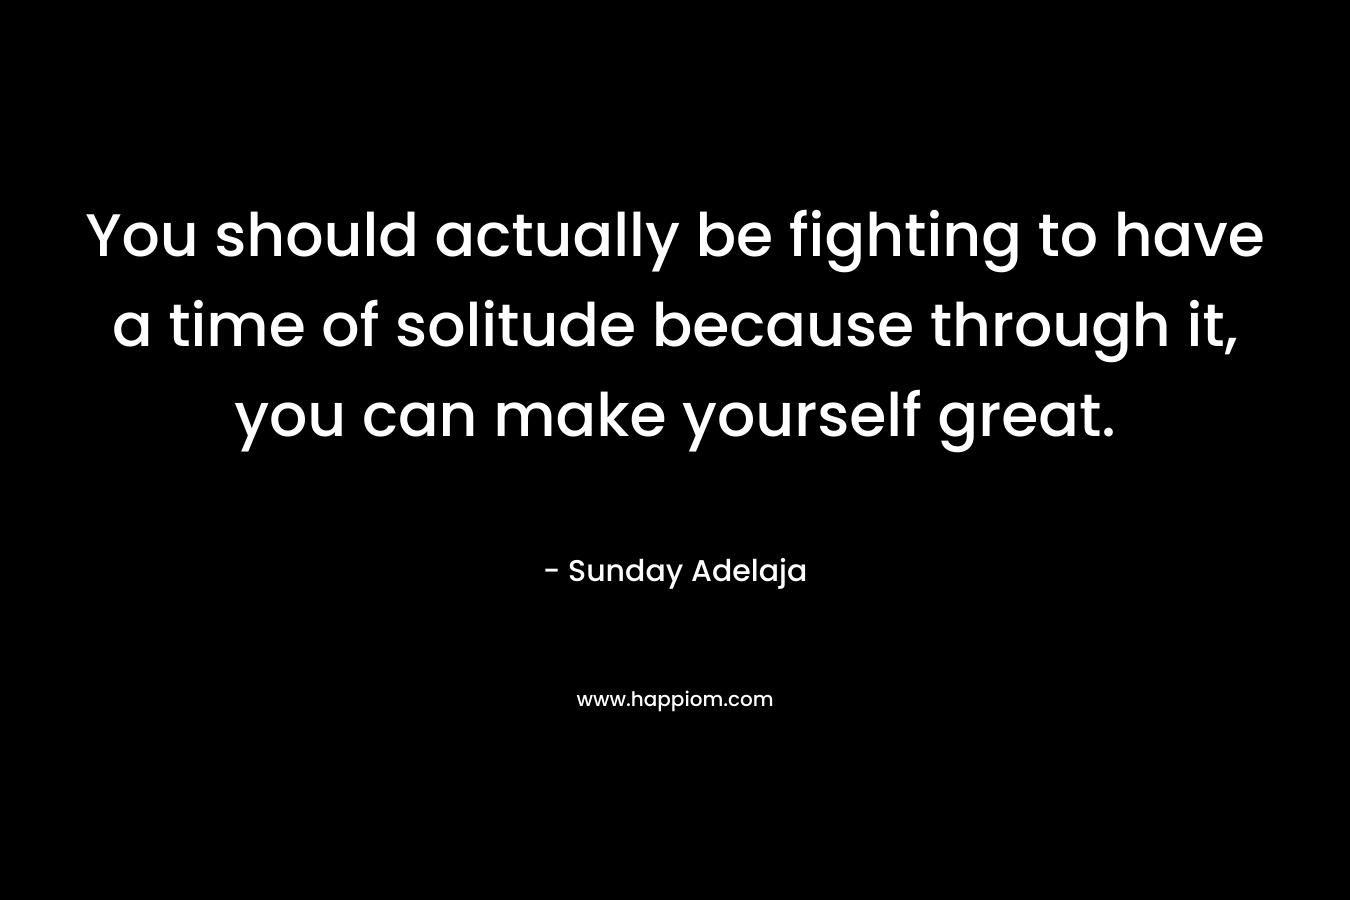 You should actually be fighting to have a time of solitude because through it, you can make yourself great.